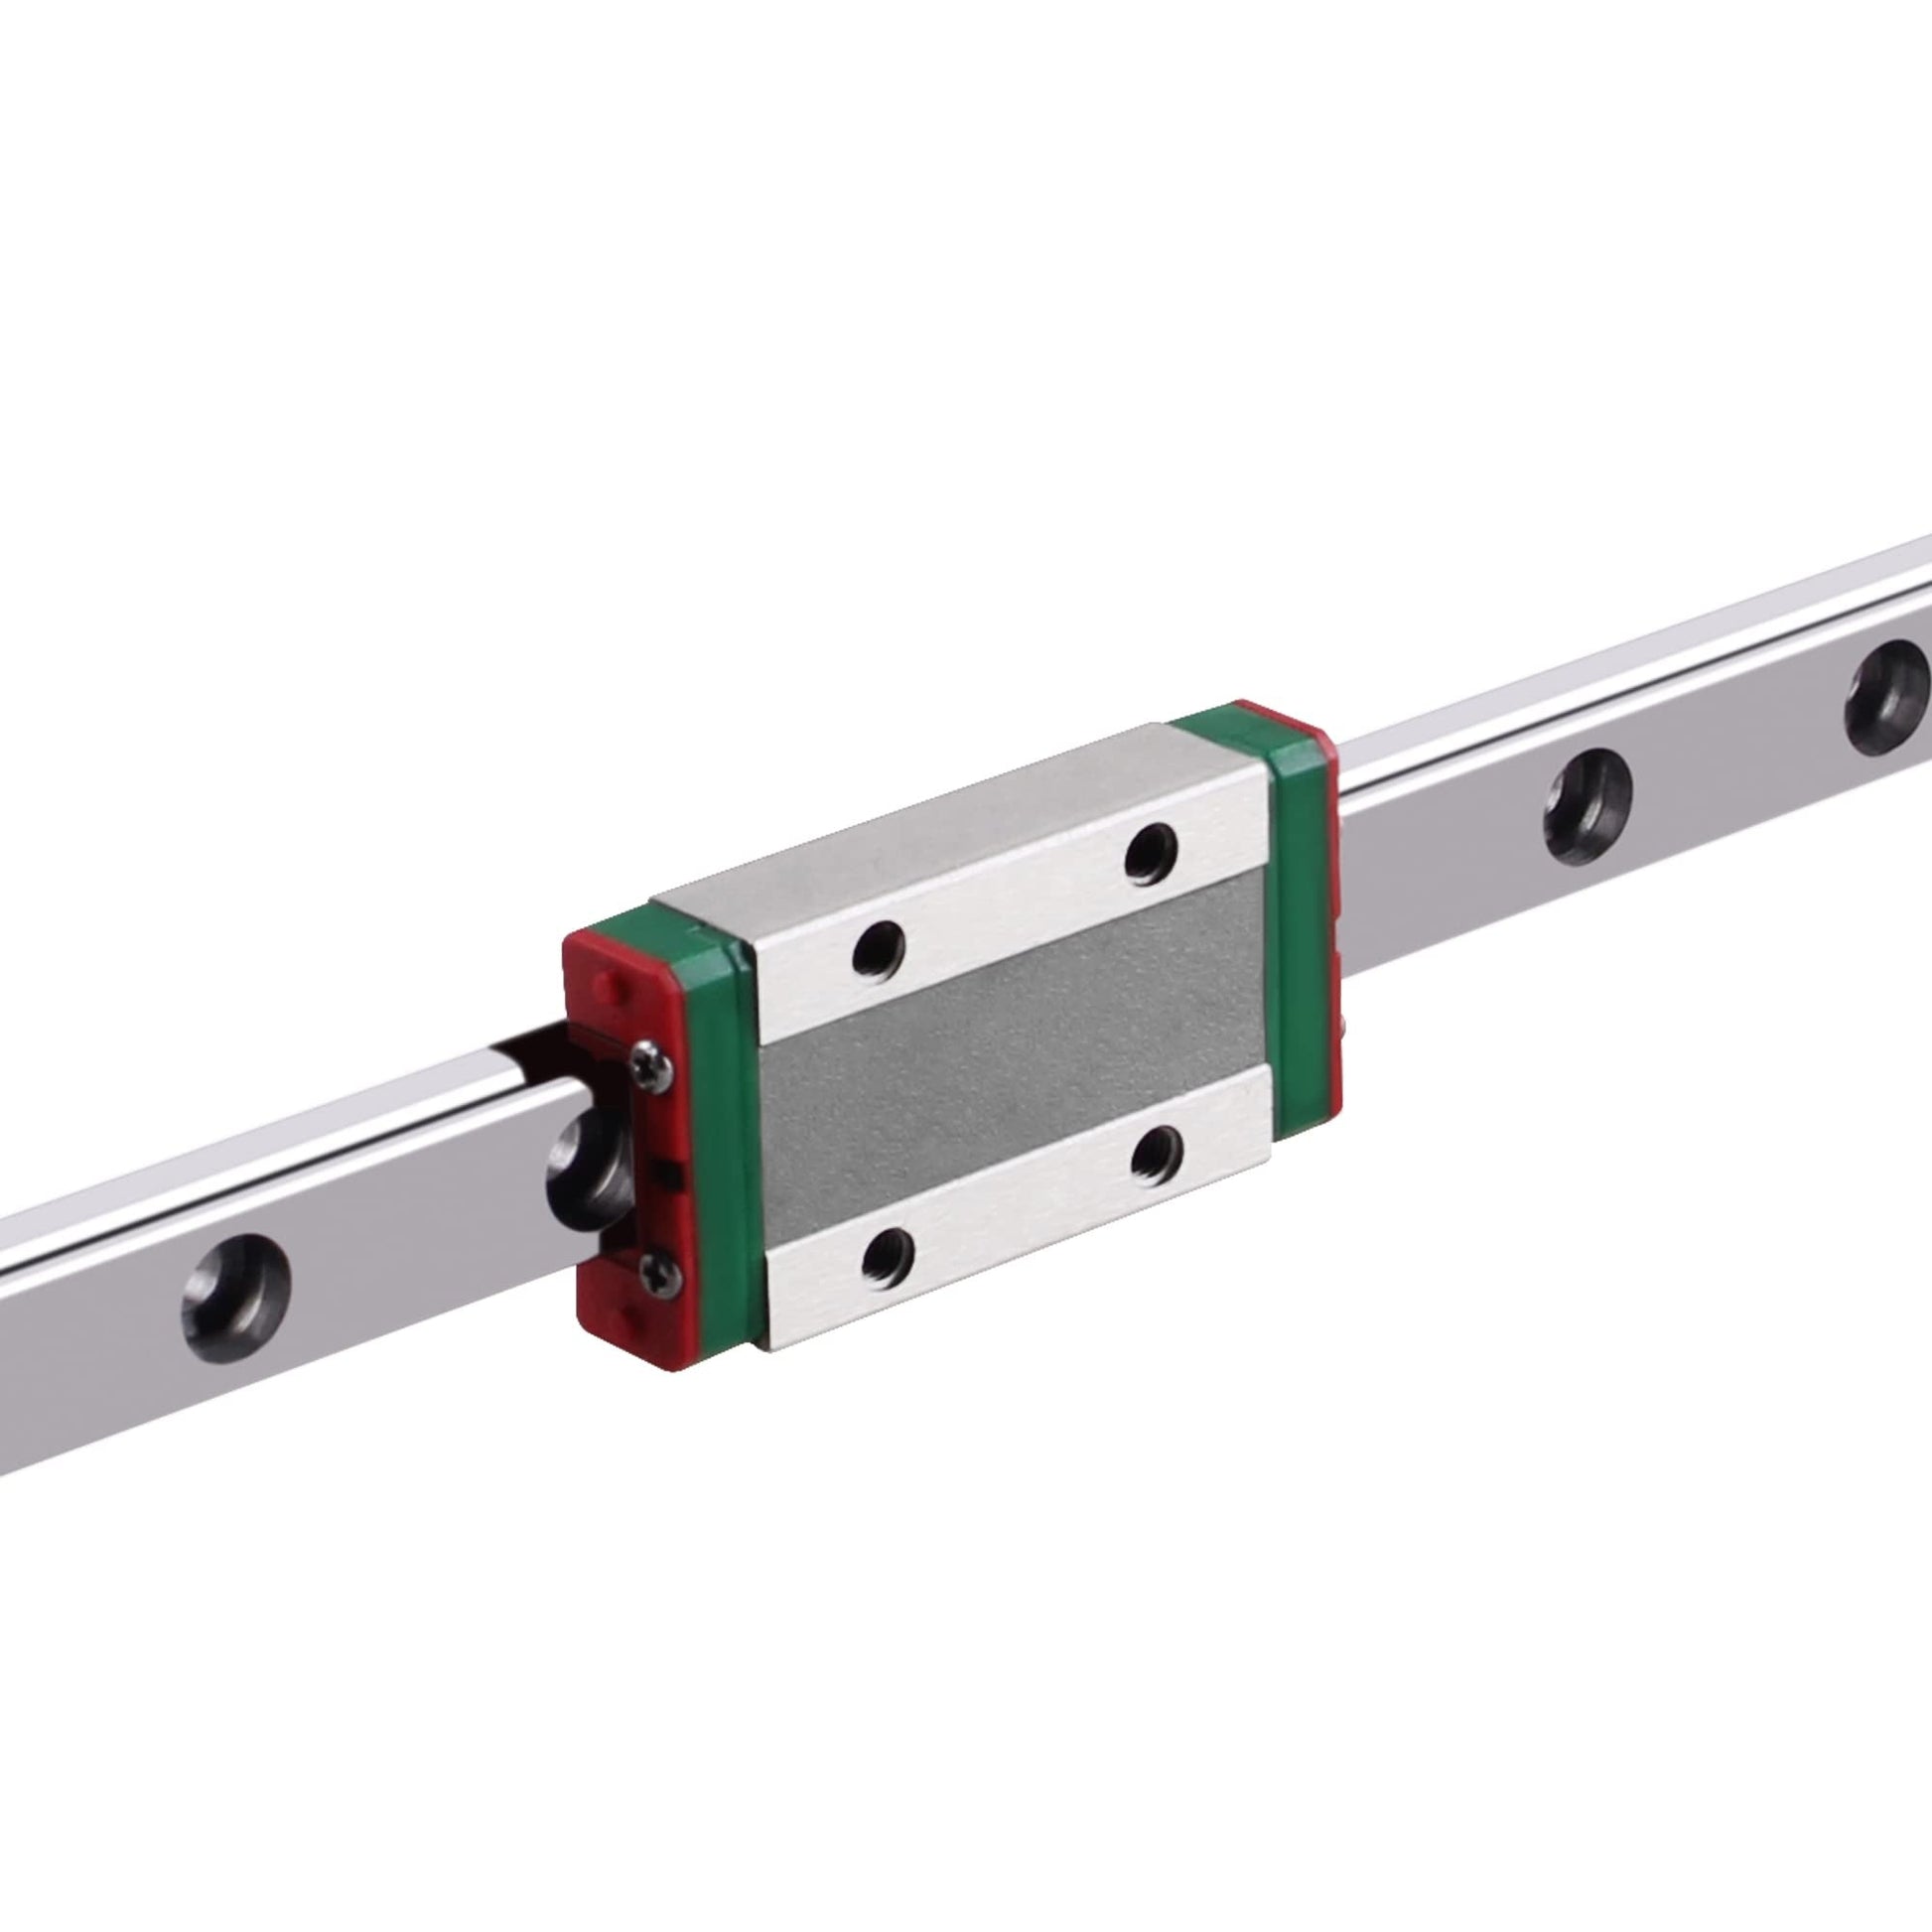 MGN9H Linear Guide Rail with Sliding Block - 1M